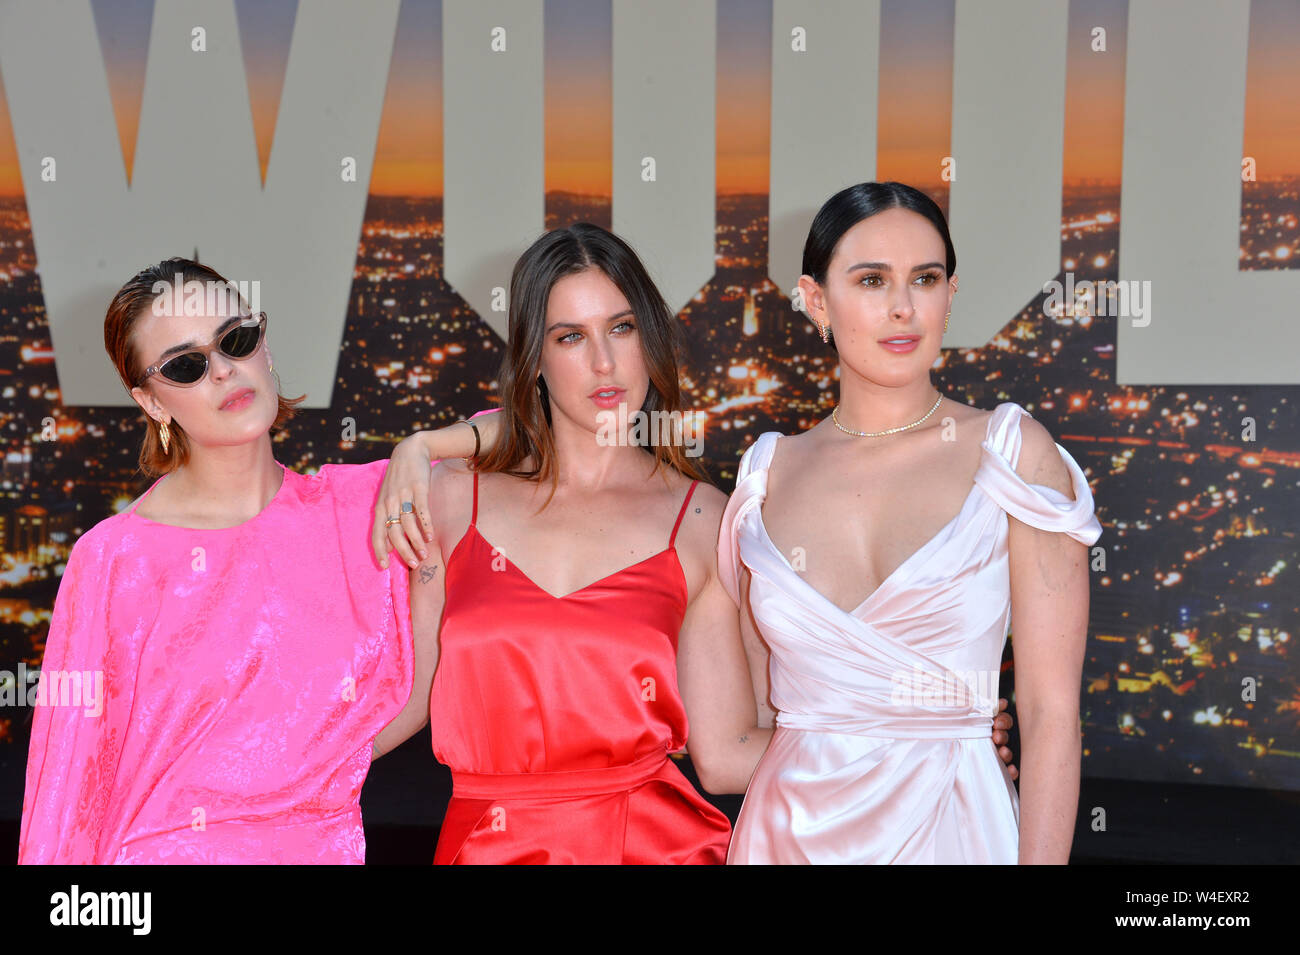 Tallulah Willis High Resolution Stock Photography and Images - Alamy